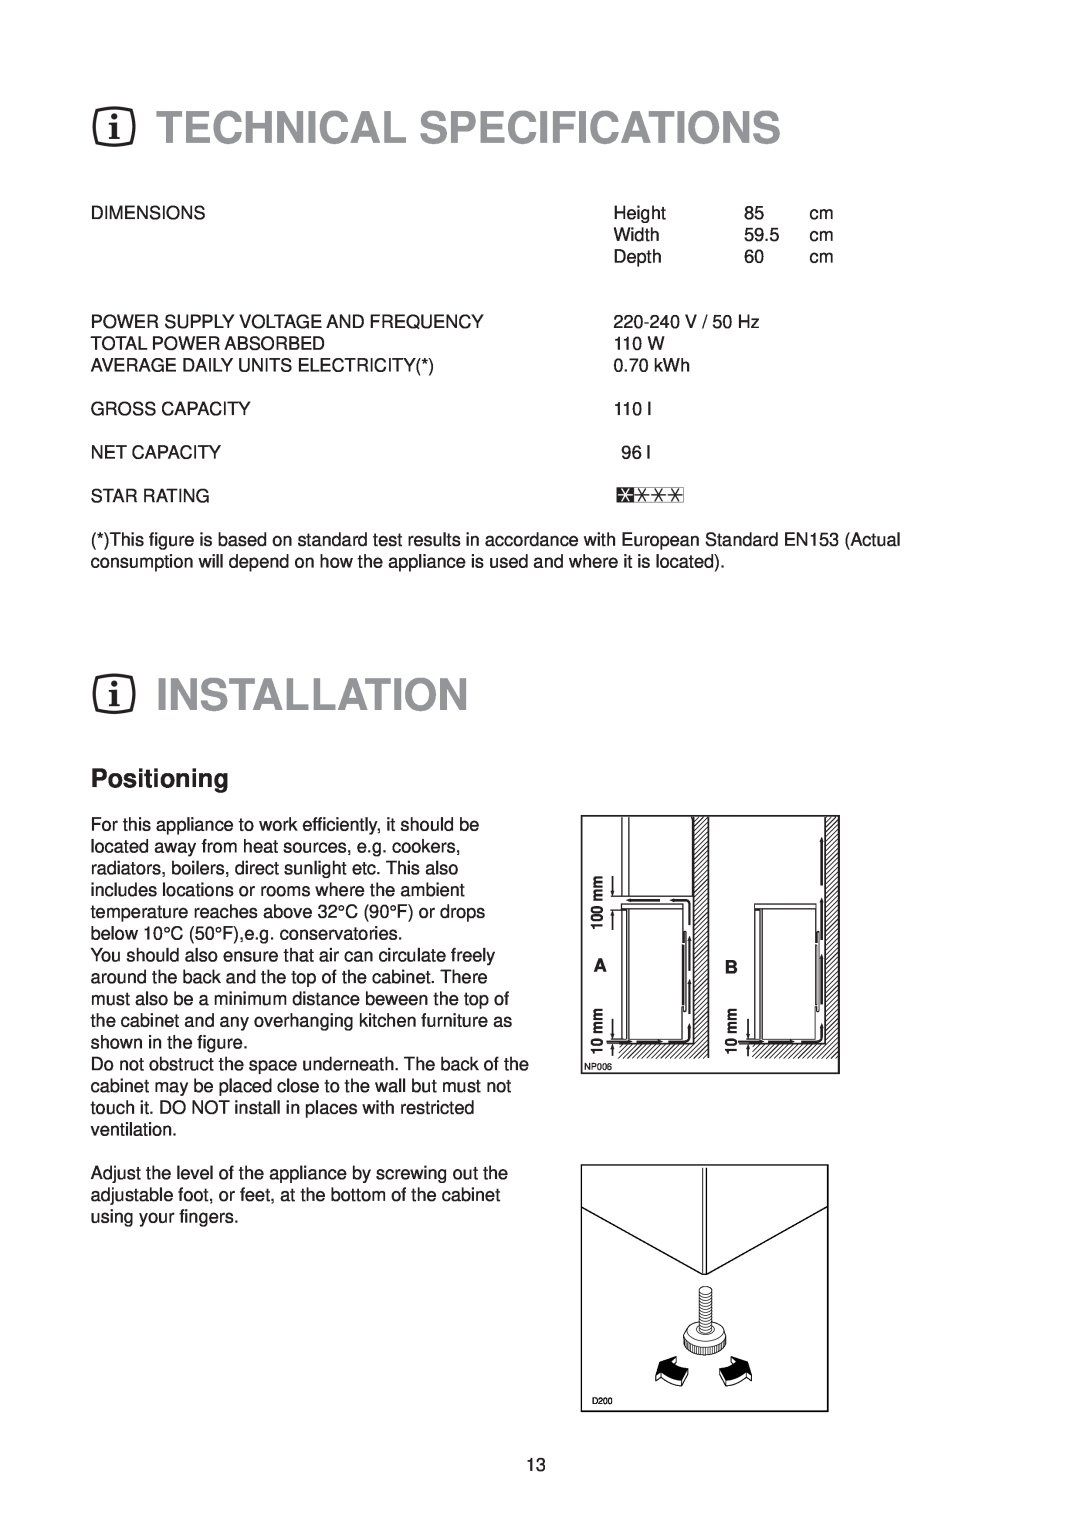 Zanussi FREEZER ZV 47 manual Technical Specifications, Installation, Positioning 